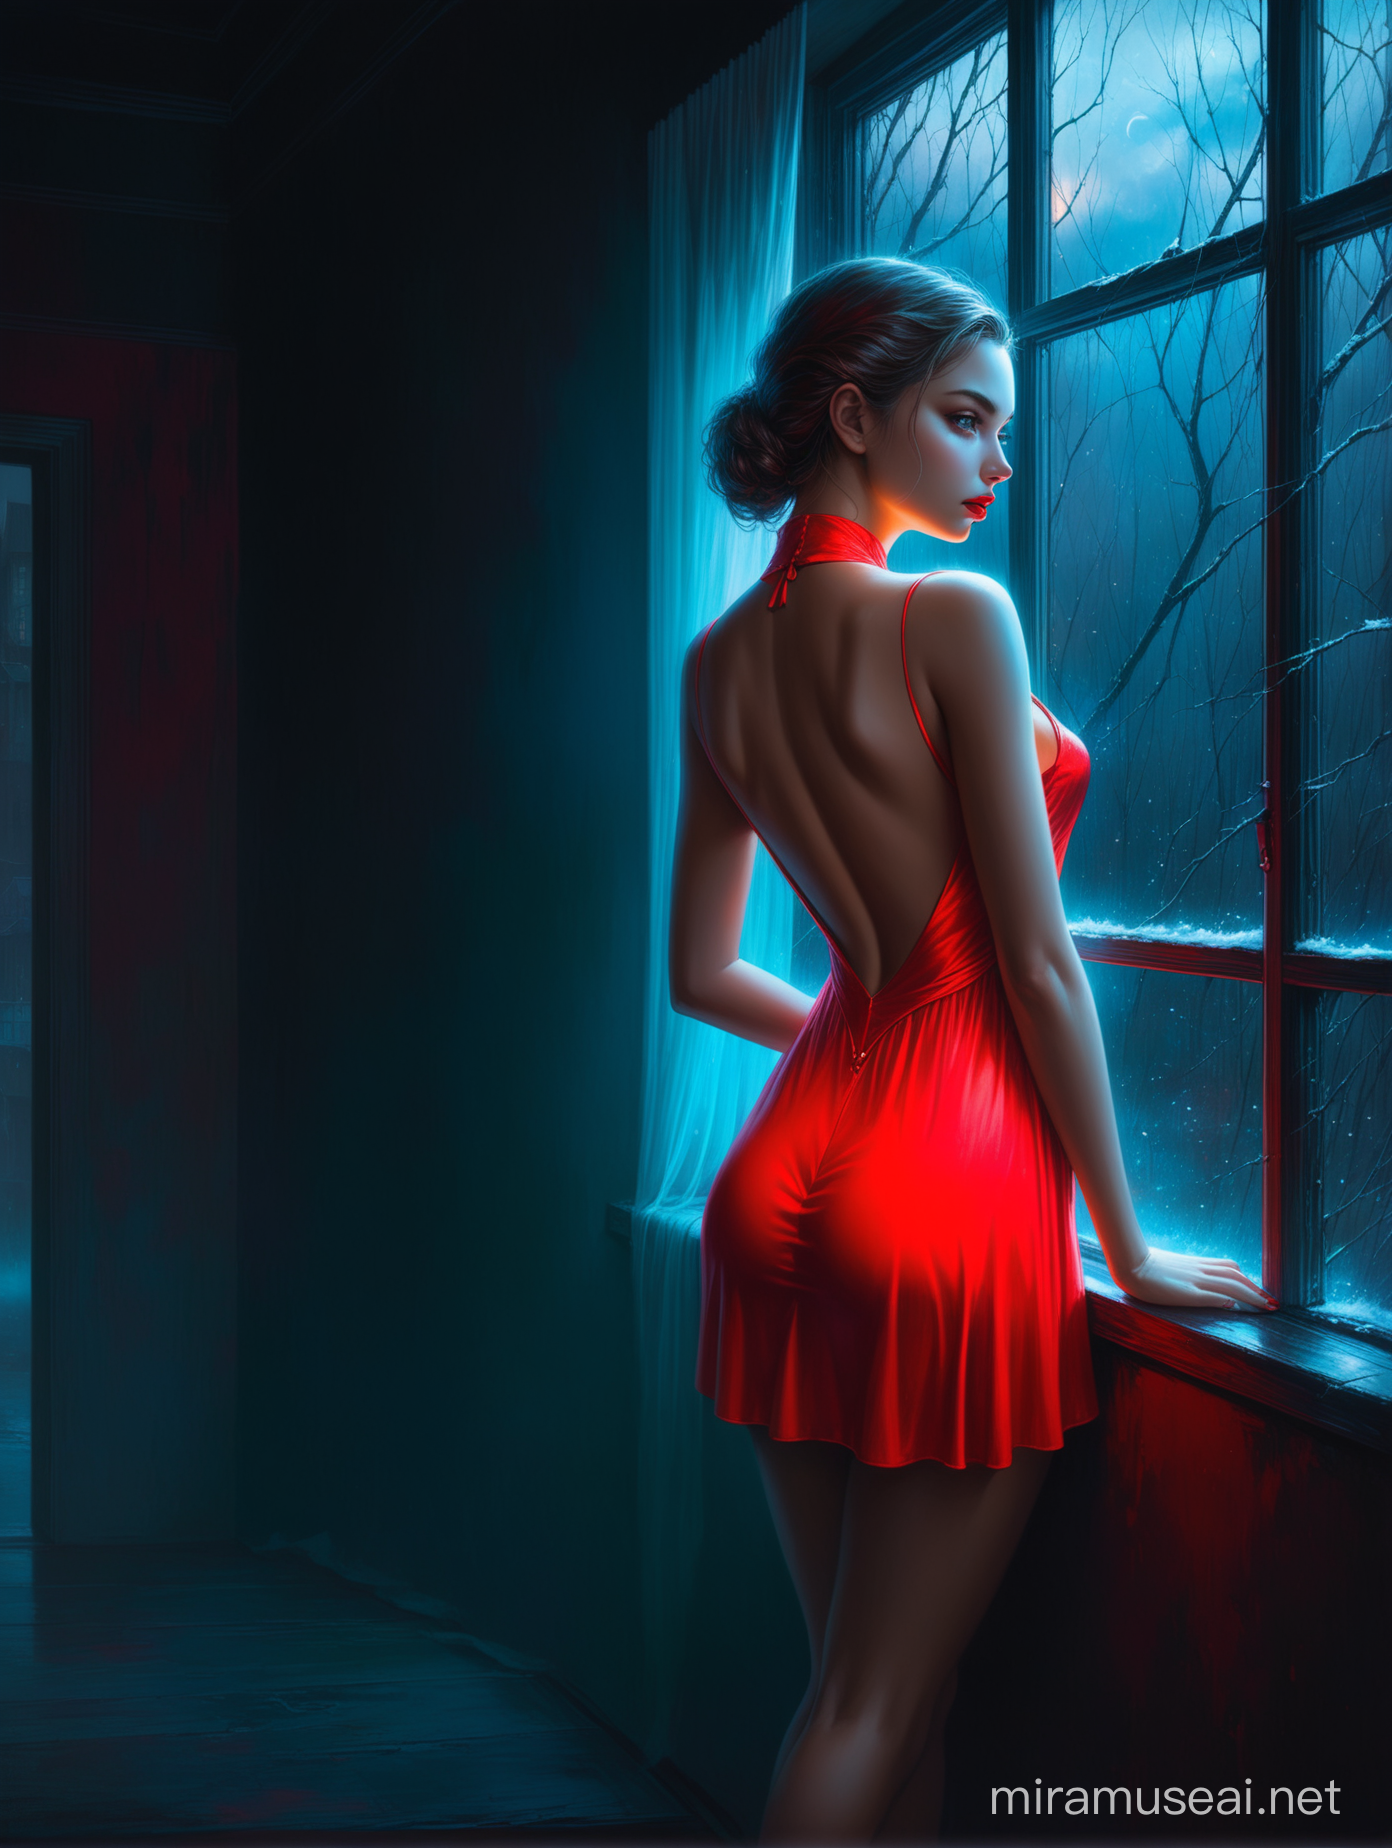 Aivision, strong neon colors, full body of beautiful young women, prety eyes, full red lips, she is wearing  short fur red dress Exposed back , with Stunning heel shoes, she looks out the window anxiously , dark environment and gloomy (neon colors tighting outside), image realistic , fairy tale , realistic facial features .Extremely detailed , intricate , beautiful , fantastic view , elegant , crispy quality Federico Bebber's expressive.